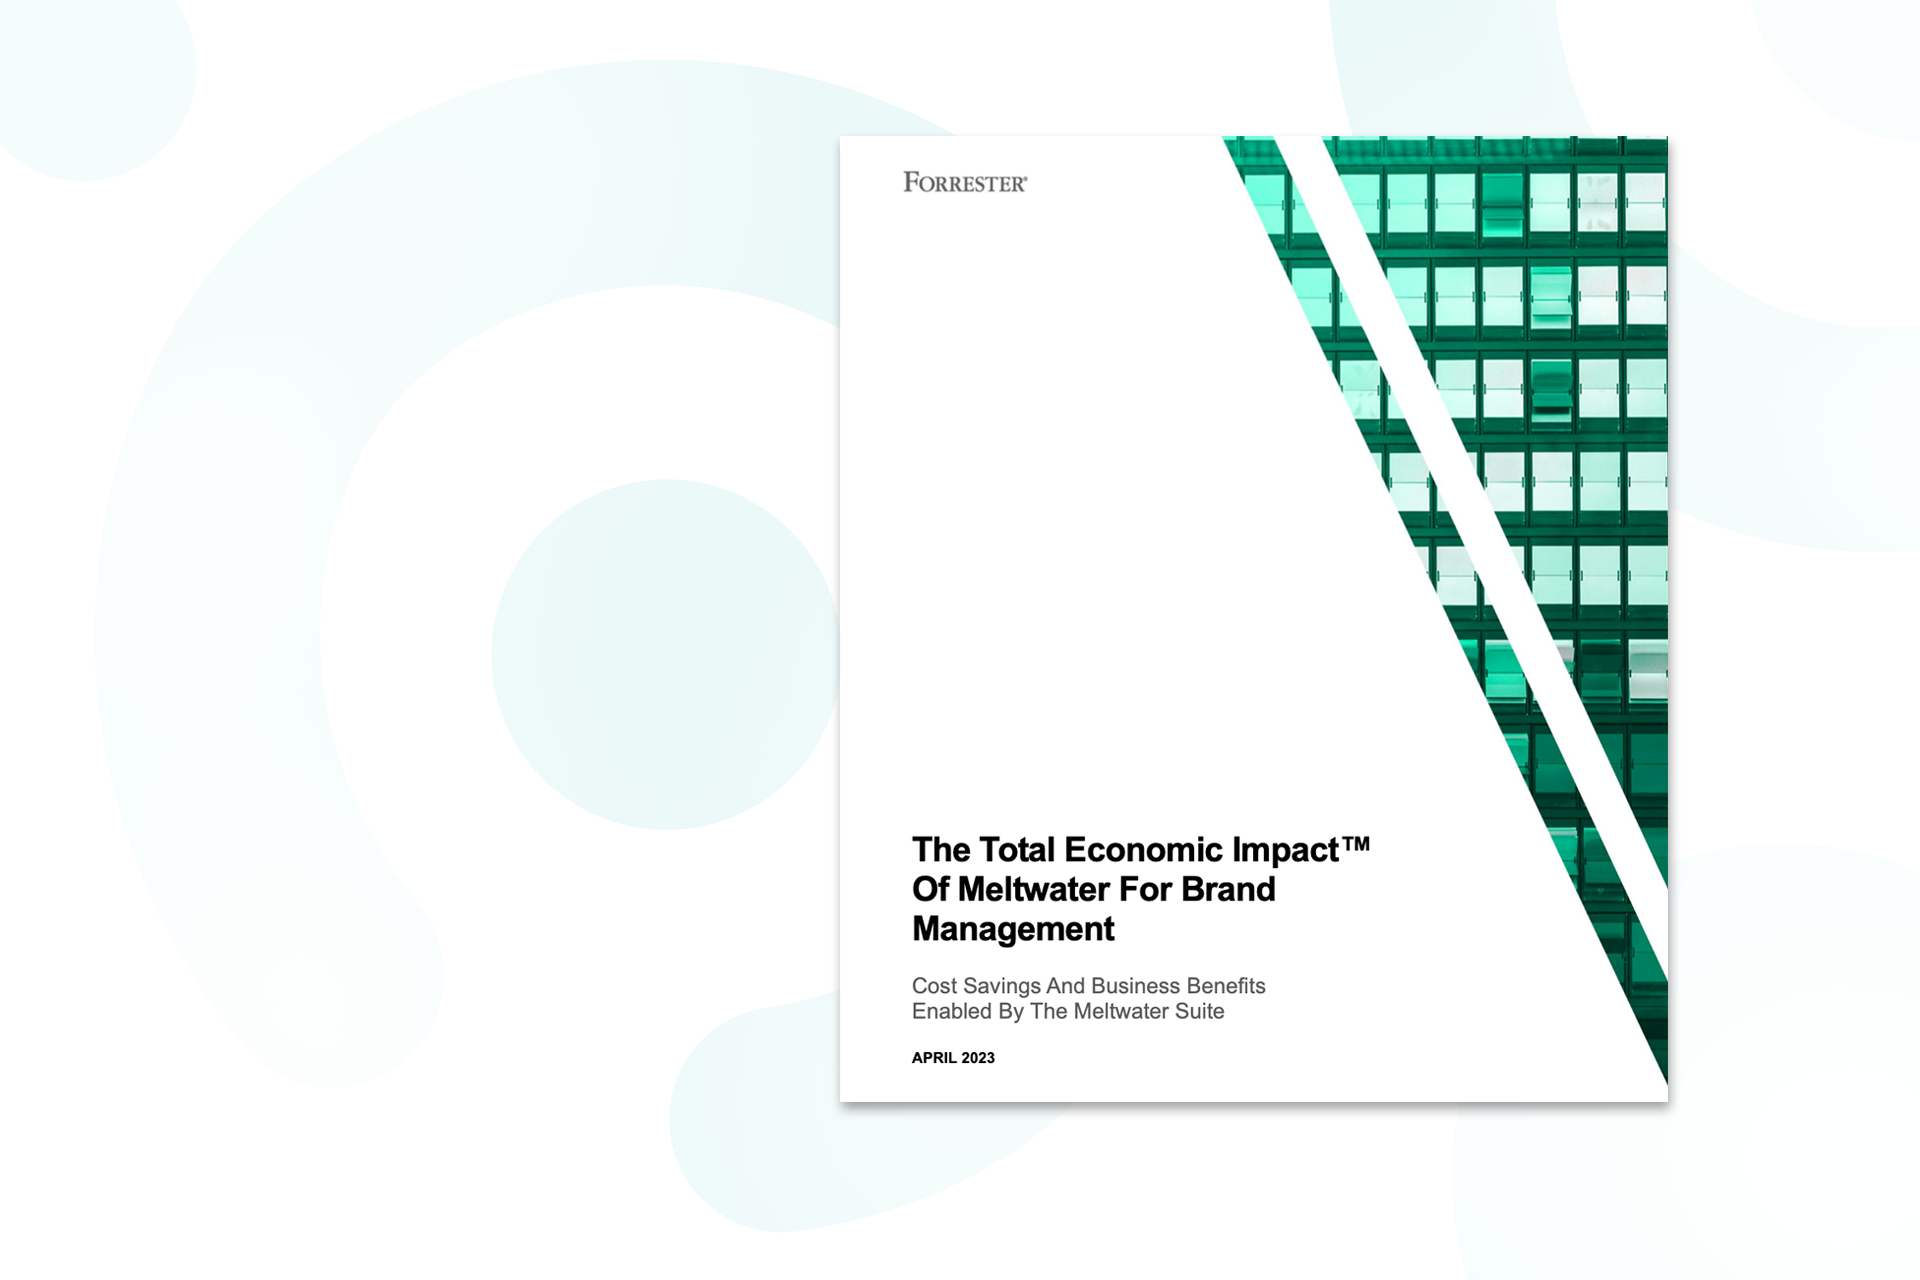 Download the Total Economic Impact Report of Meltwater for Brand Management